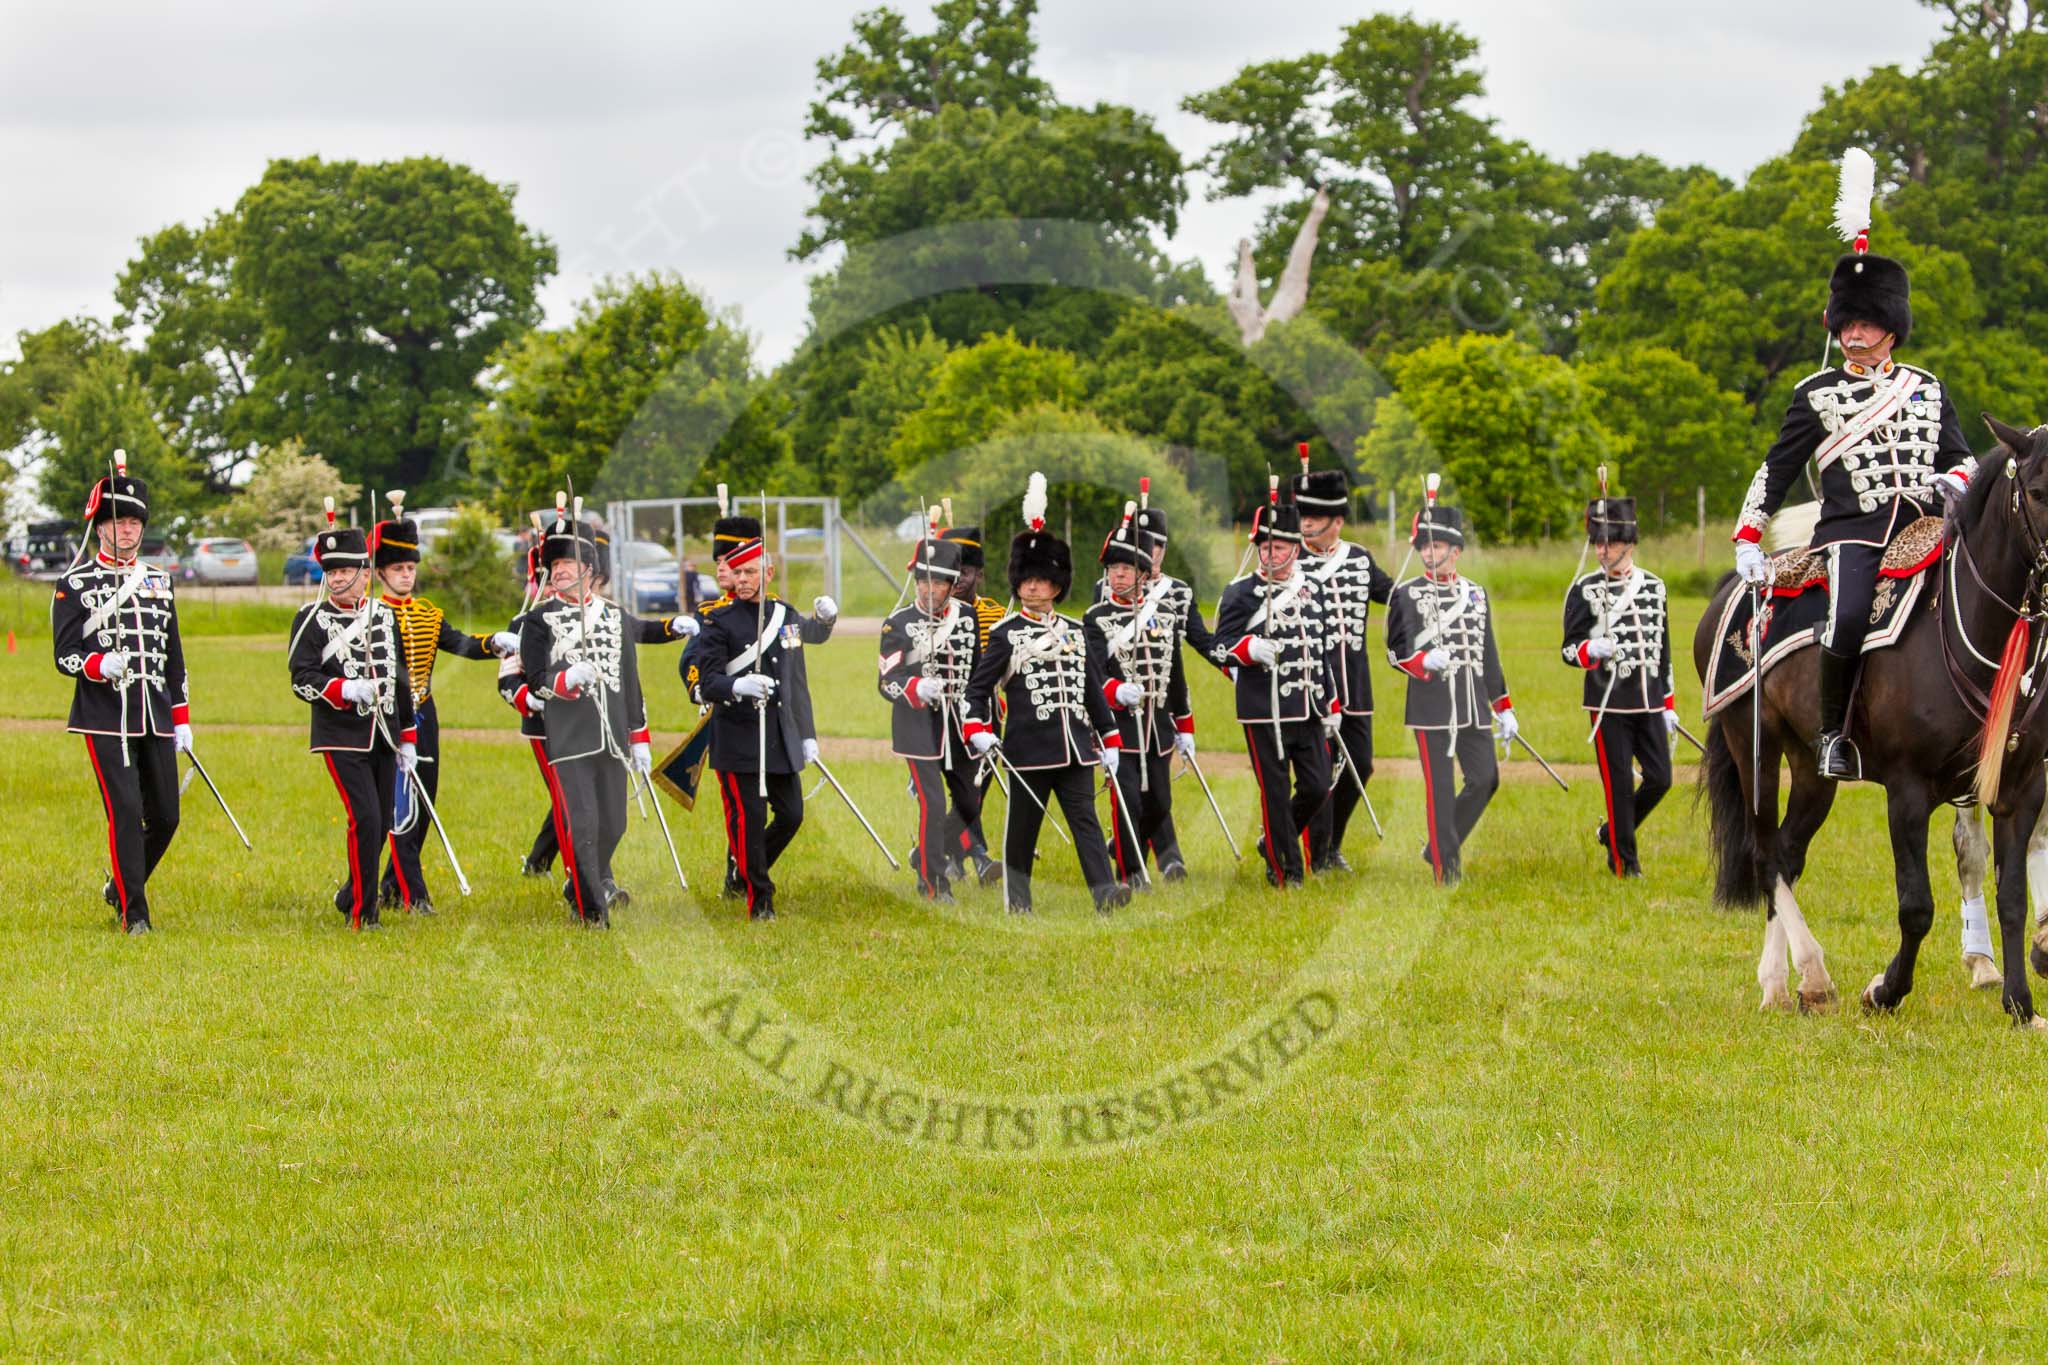 The Light Cavalry HAC Annual Review and Inspection 2013.
Windsor Great Park Review Ground,
Windsor,
Berkshire,
United Kingdom,
on 09 June 2013 at 13:32, image #407